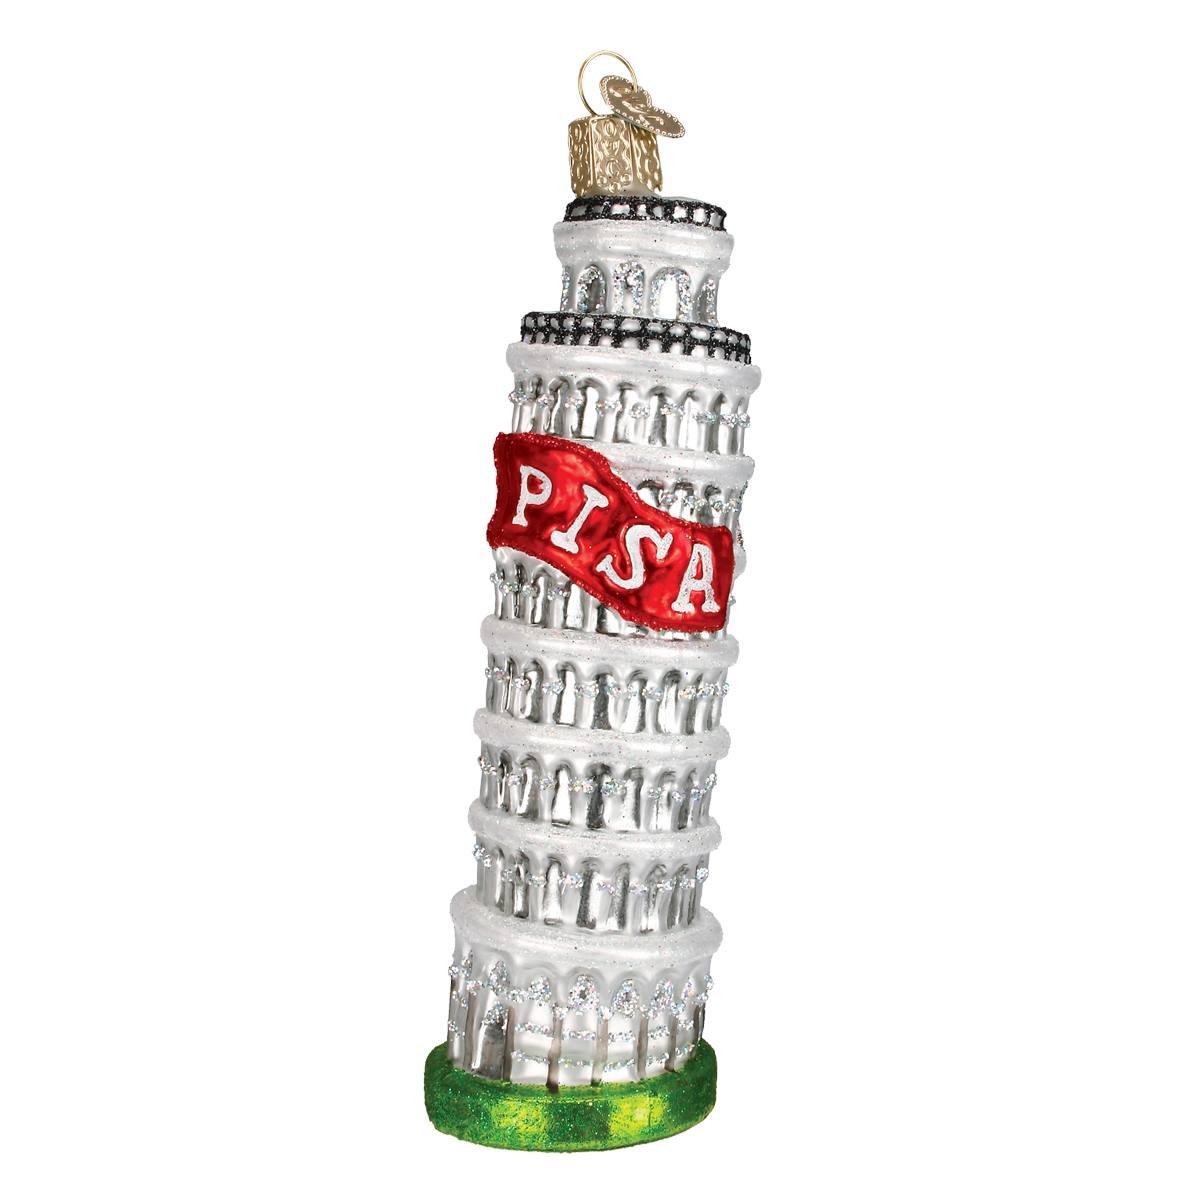 Leaning Tower of Pisa Ornament